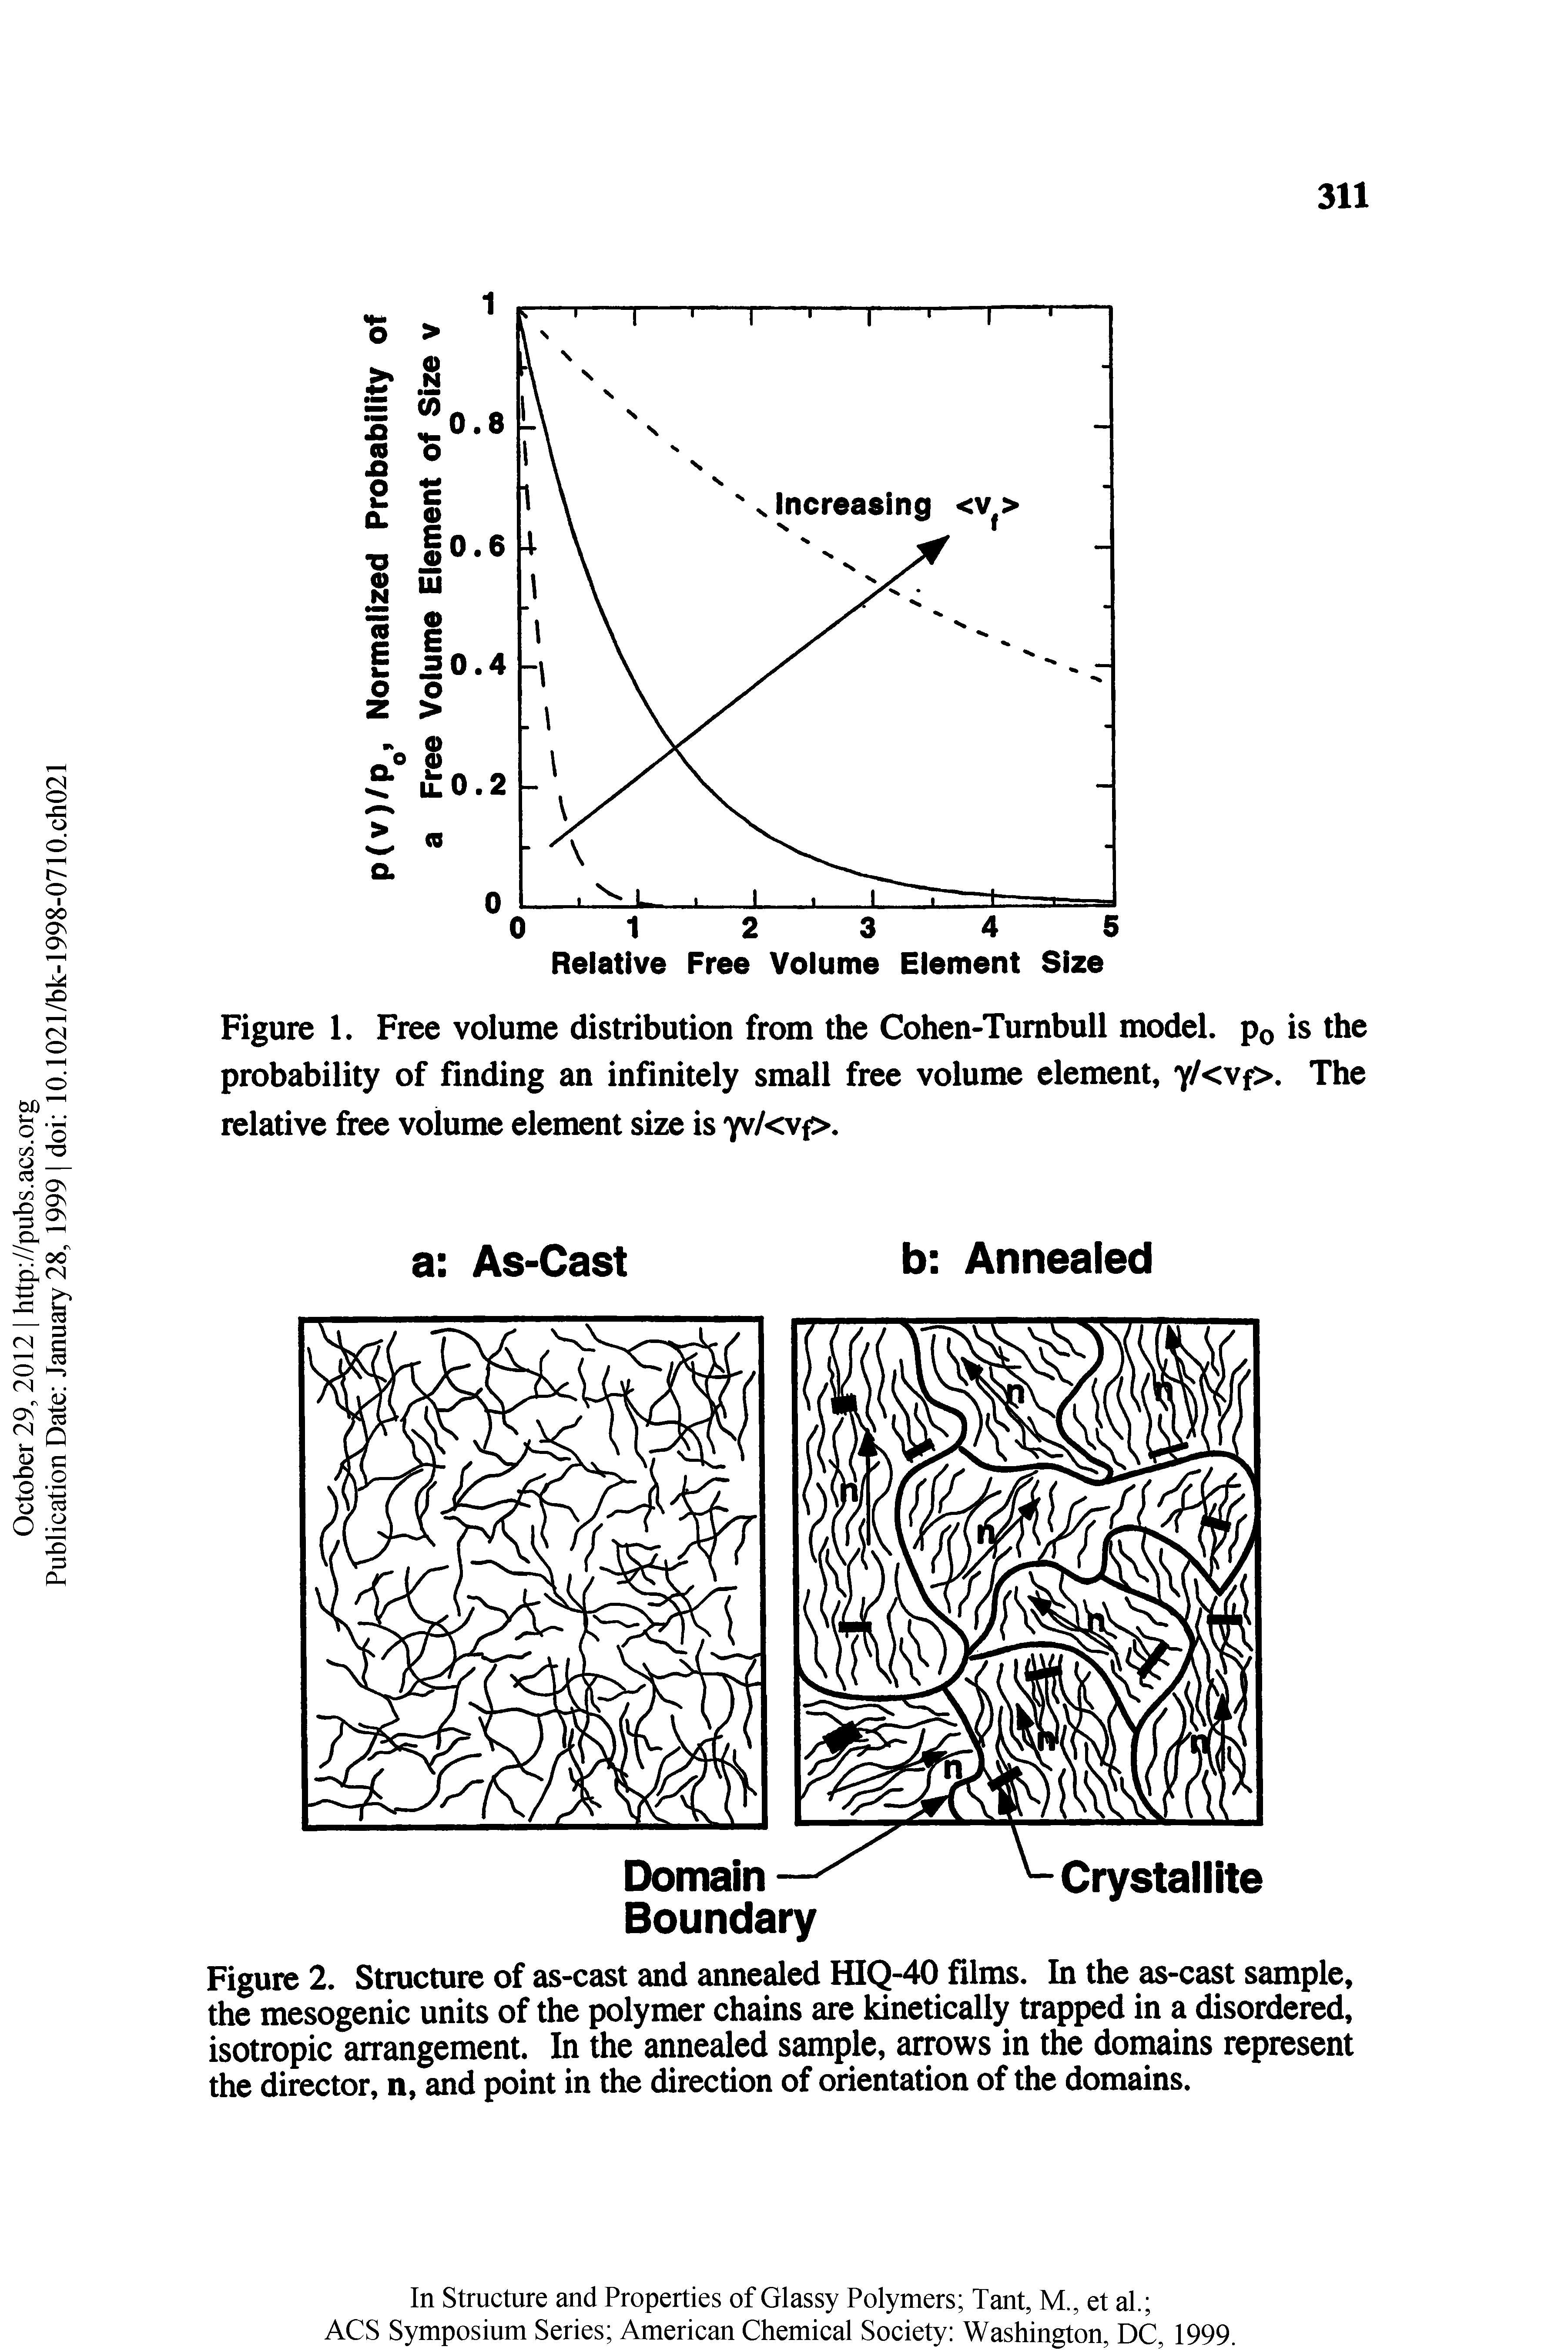 Figure 1. Free volume distribution from the Cohen-Tumbull model, po is the probability of finding an infinitely small free volume element, y/<vf>. The relative free volume element size is 7v/cvf>.